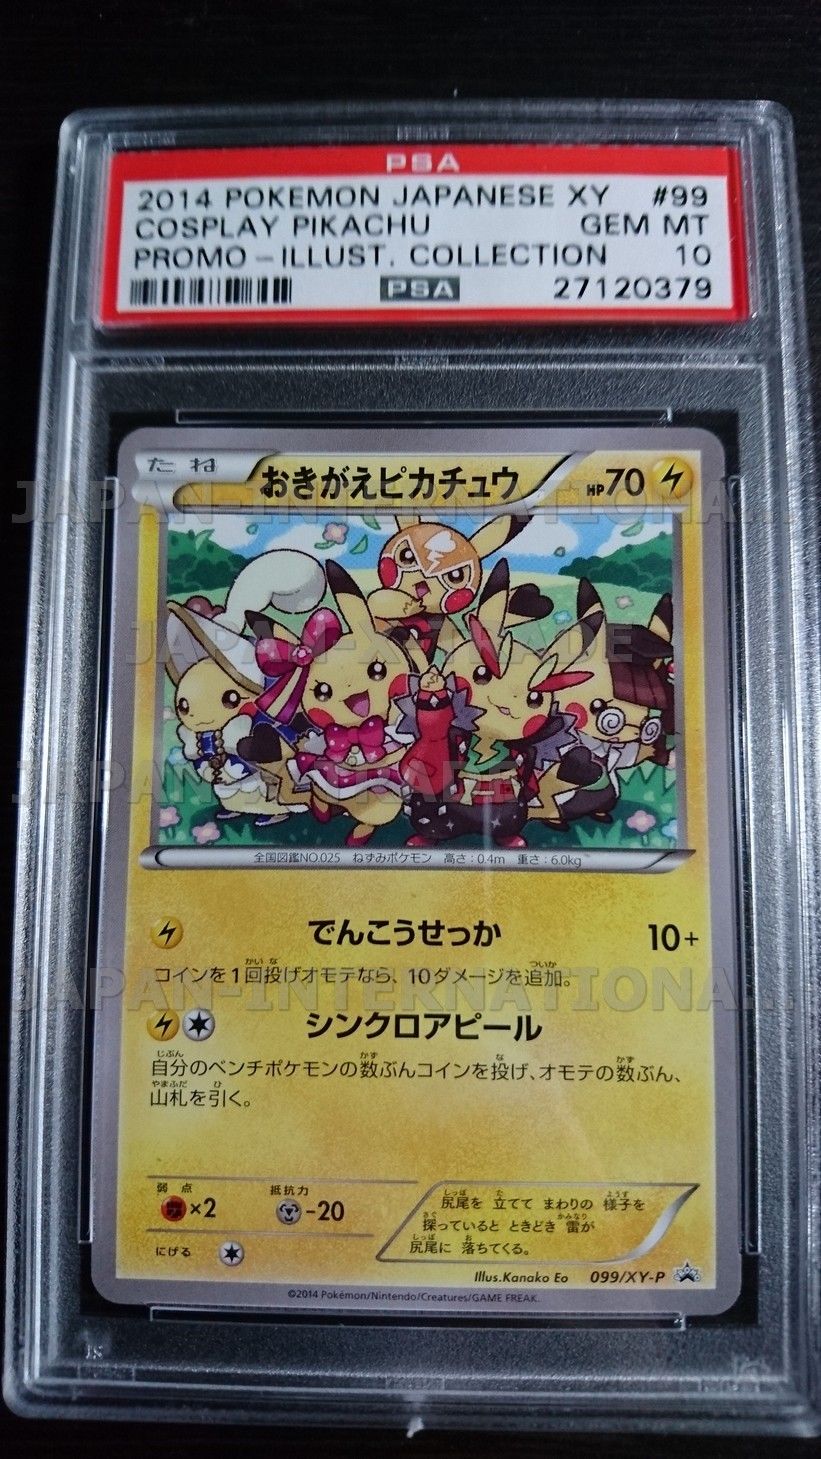 Pokemon Trading Card Game Pokemon Individual Cards Collectible Card Games Pokemon Japanese Cosplay Pikachu 099 Xy P Promo Illust Collection